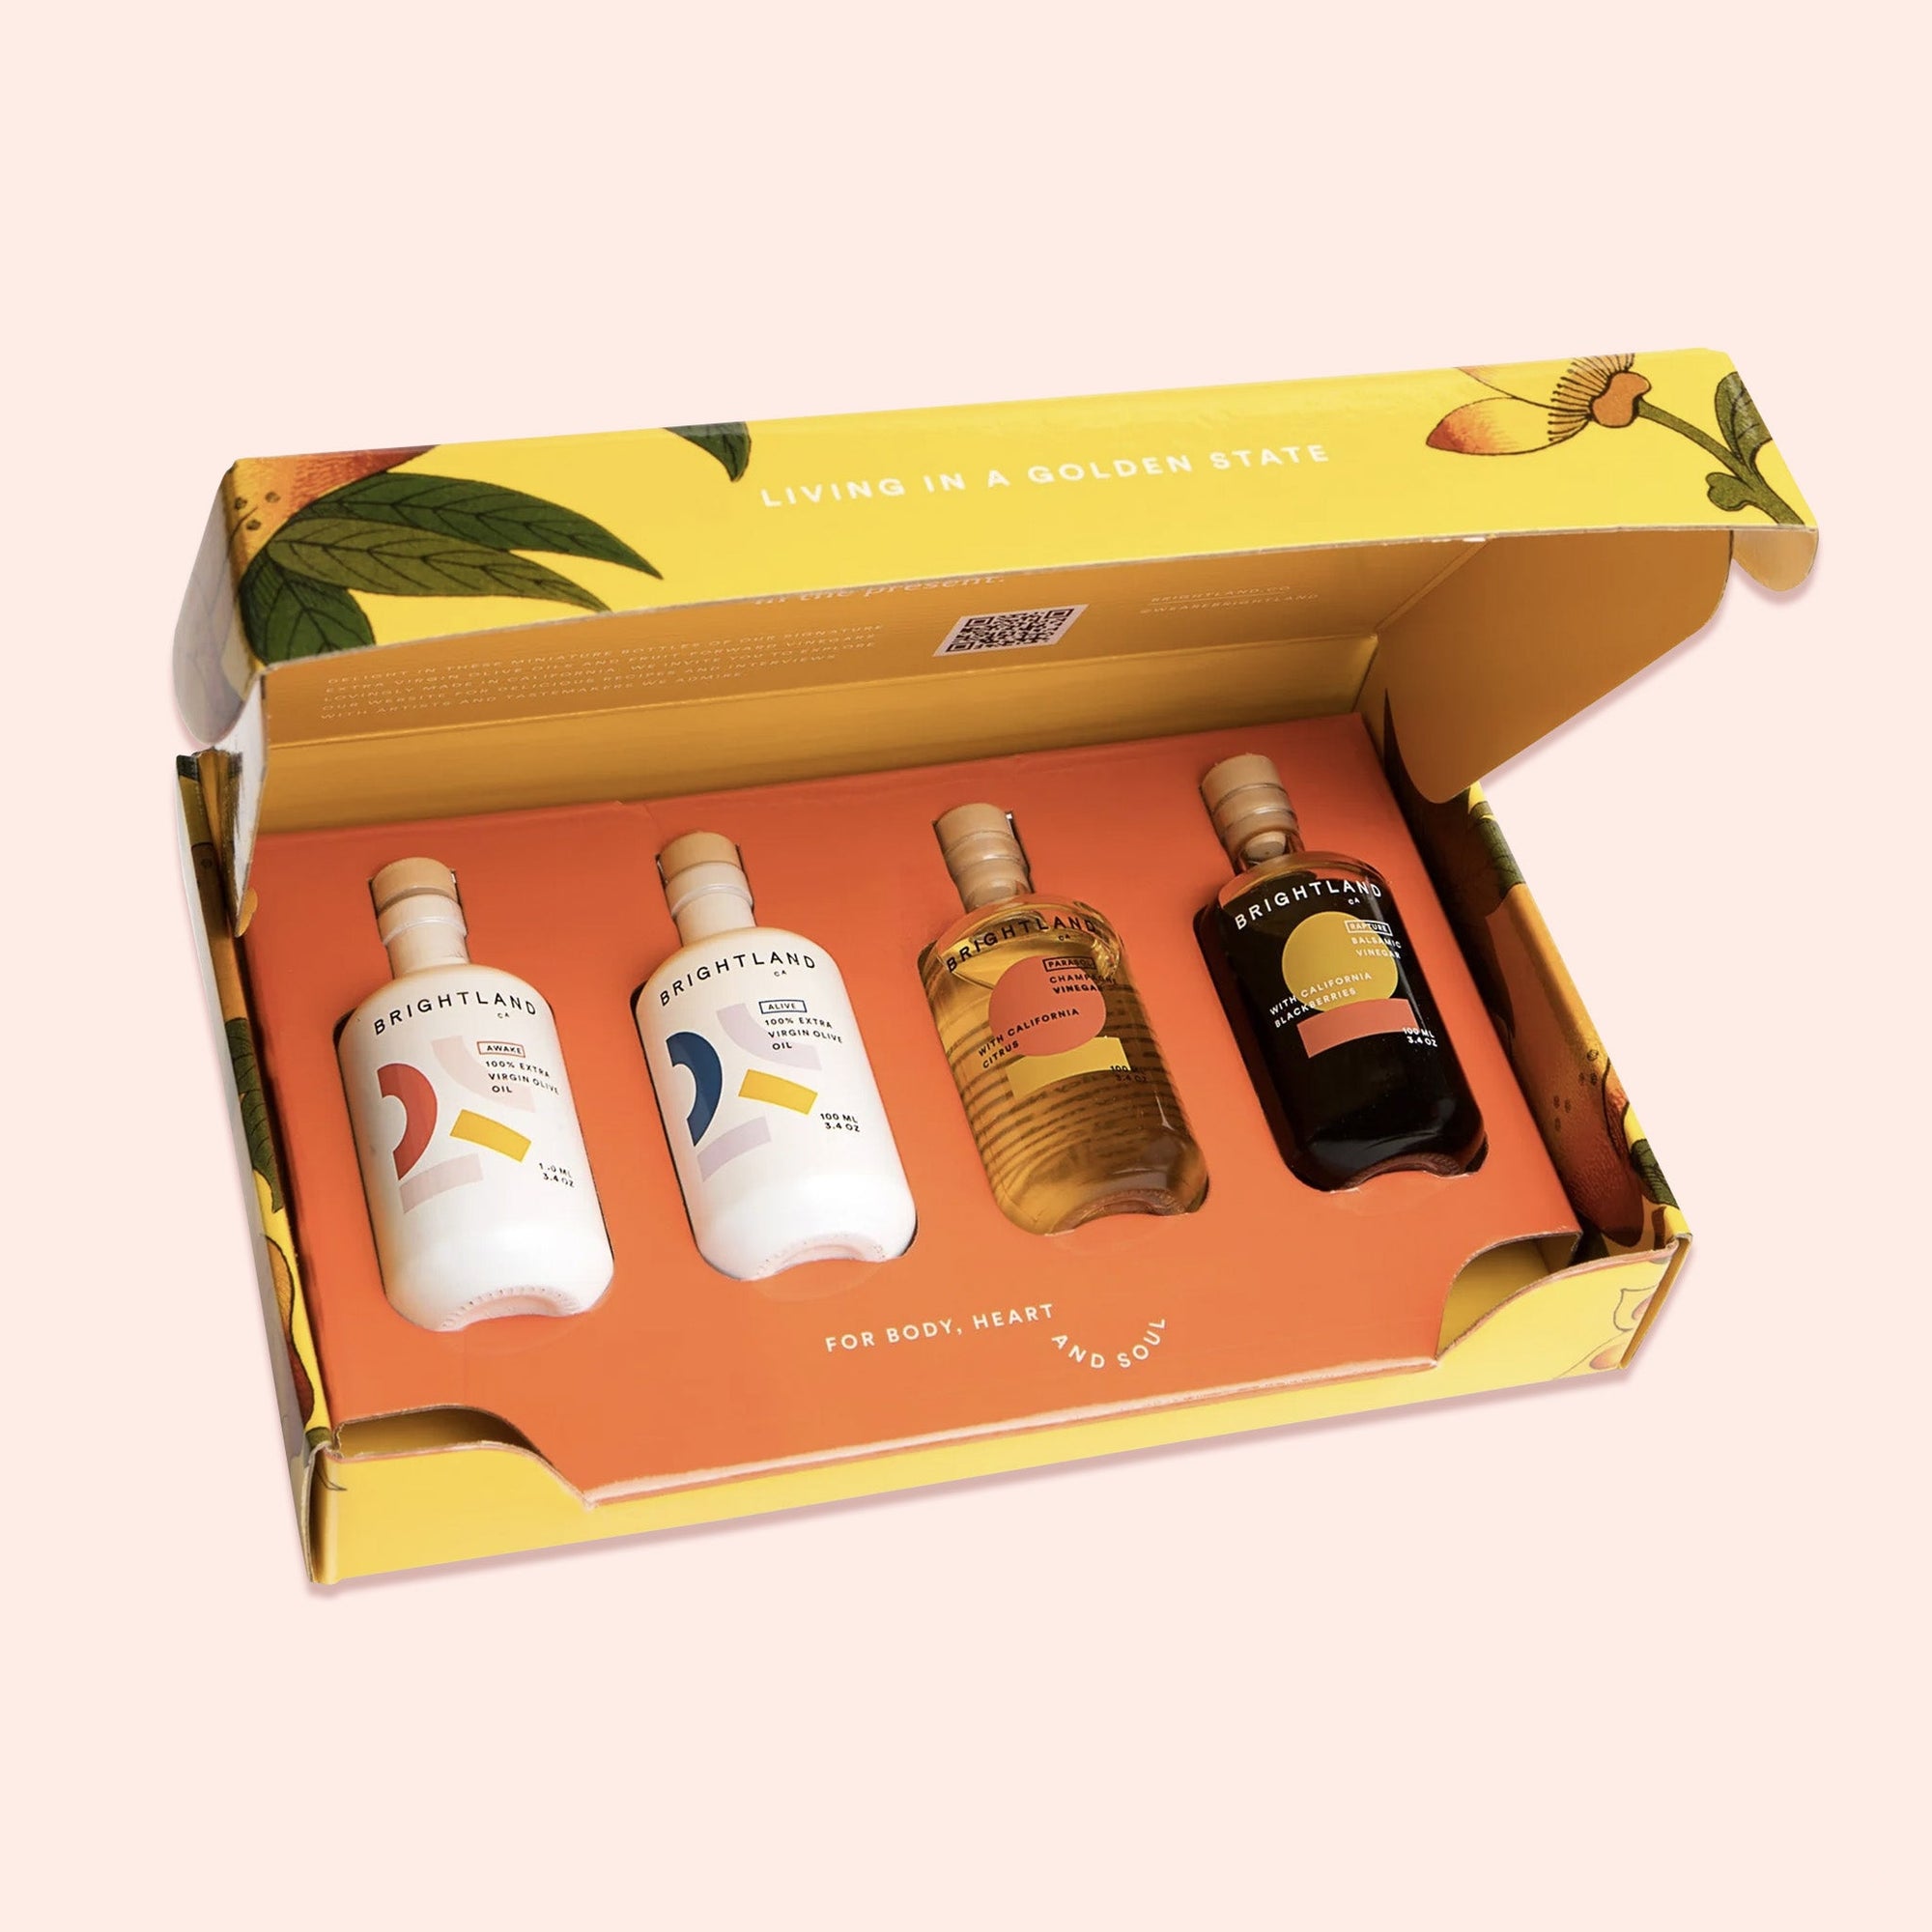 On a light pink background sits an open box of bottles. This yellow box has colorful illustrations of flowers and leaves and the inside is orange with two white bottles and two clear bottles. They are bottles of olive oils and vinegars. It has white lettering that says "LIVING IN A GOLDEN STATE" and "FOR BODY, HEART AND SOUL."